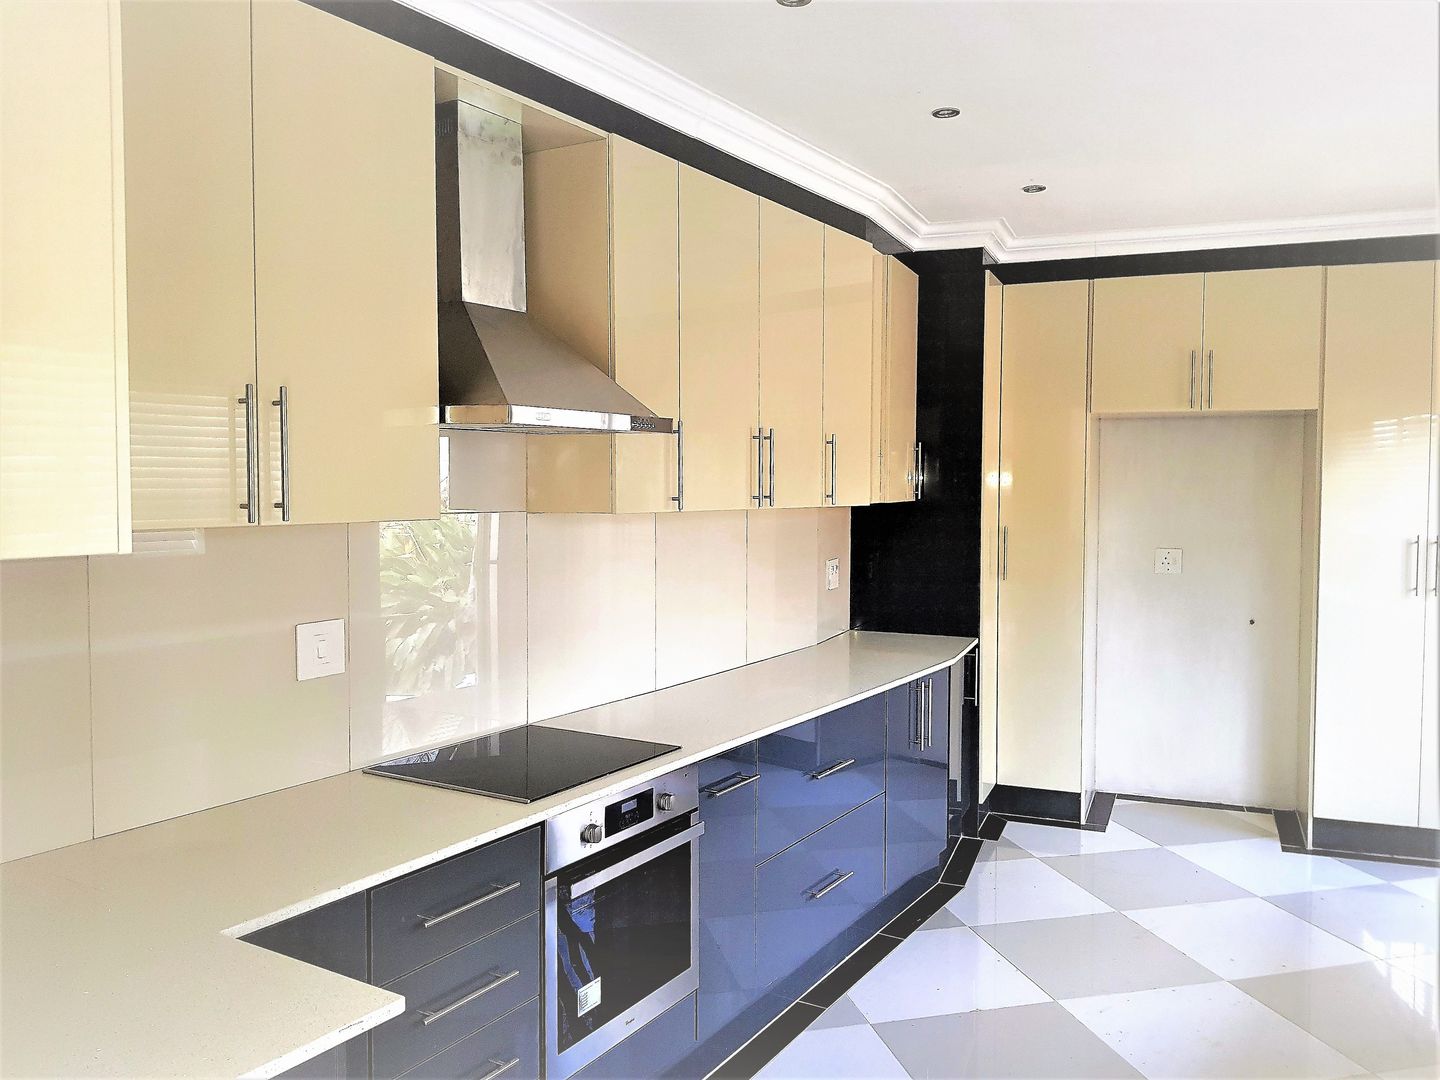 Modern Kitchen Revamp - High Gloss Two-tone , Zingana Kitchens and Cabinetry Zingana Kitchens and Cabinetry Built-in kitchens